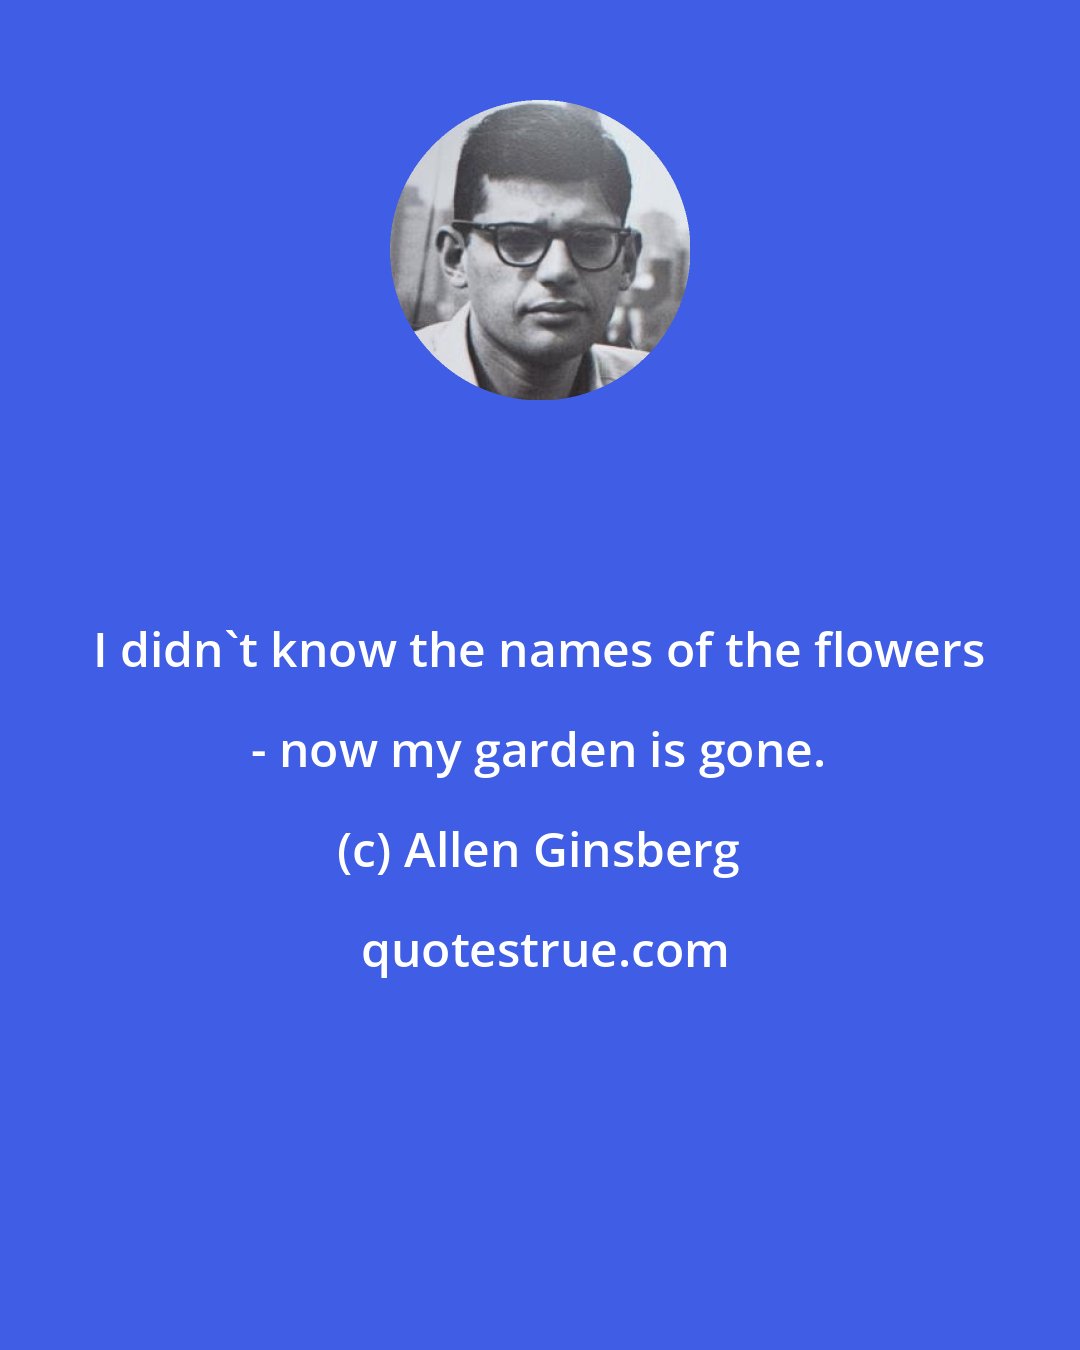 Allen Ginsberg: I didn't know the names of the flowers - now my garden is gone.